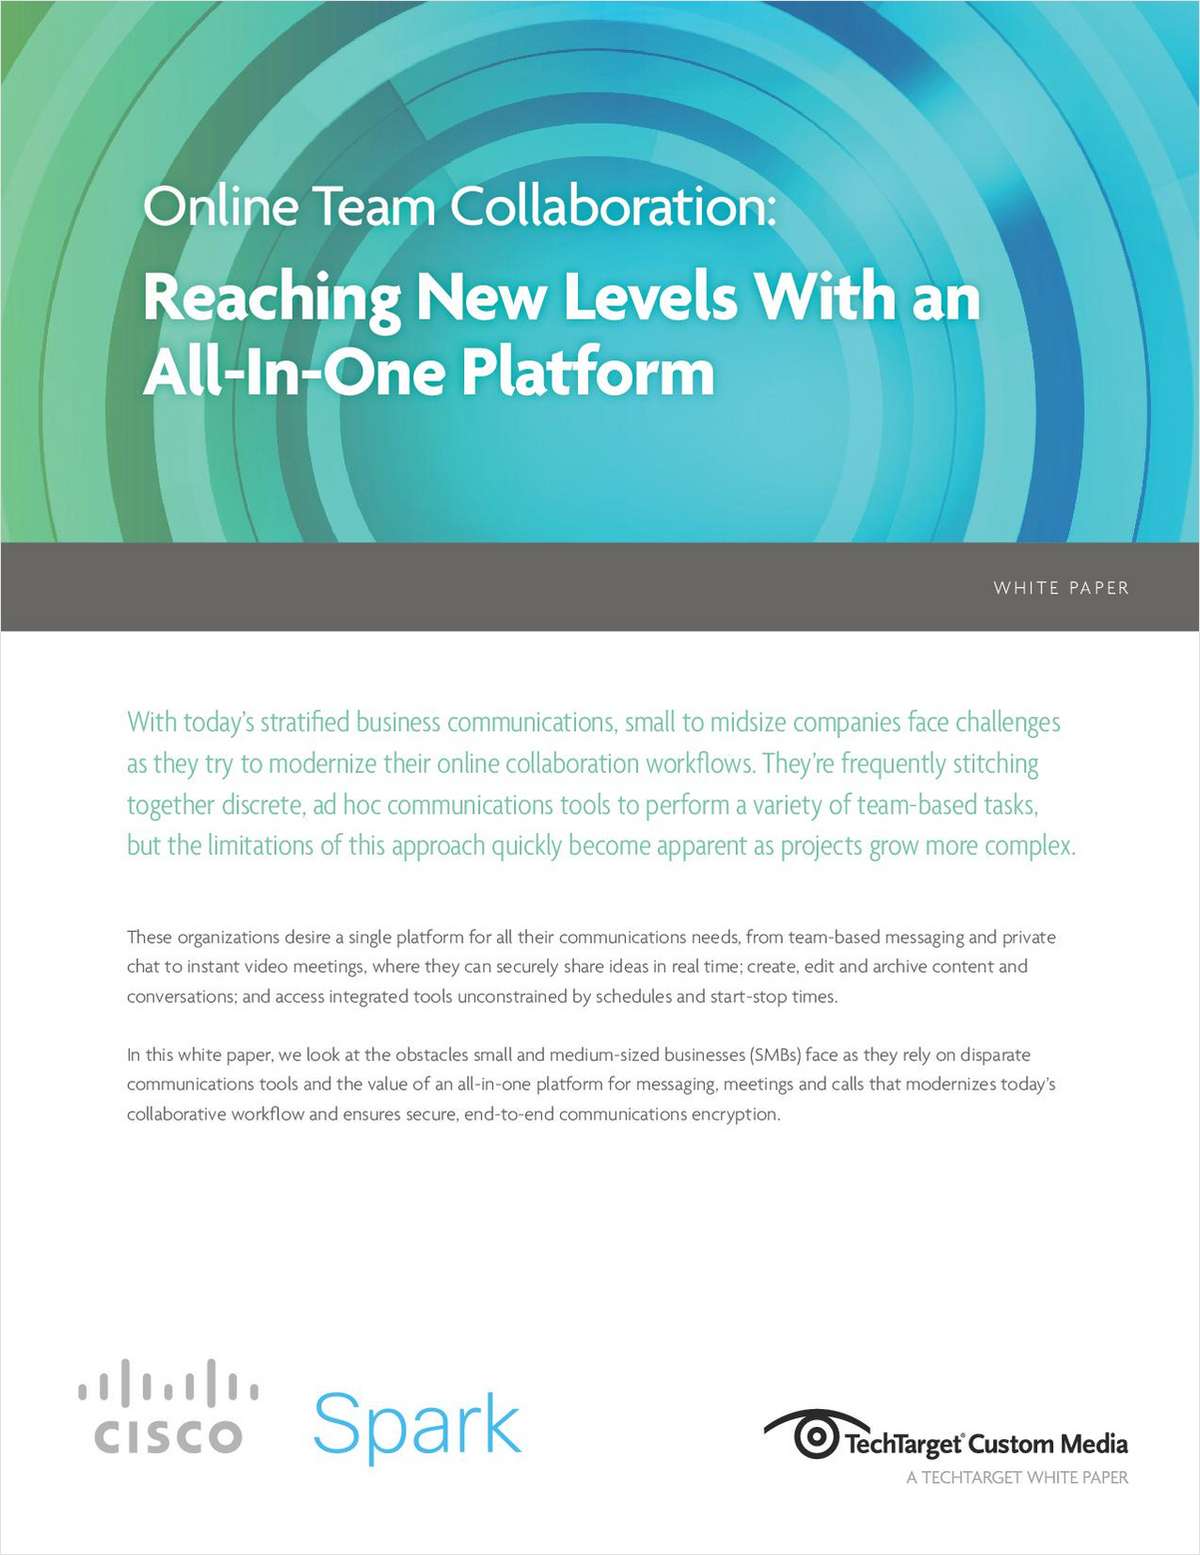 Online Team Collaboration: Reaching New Levels with an All-In-One Platform